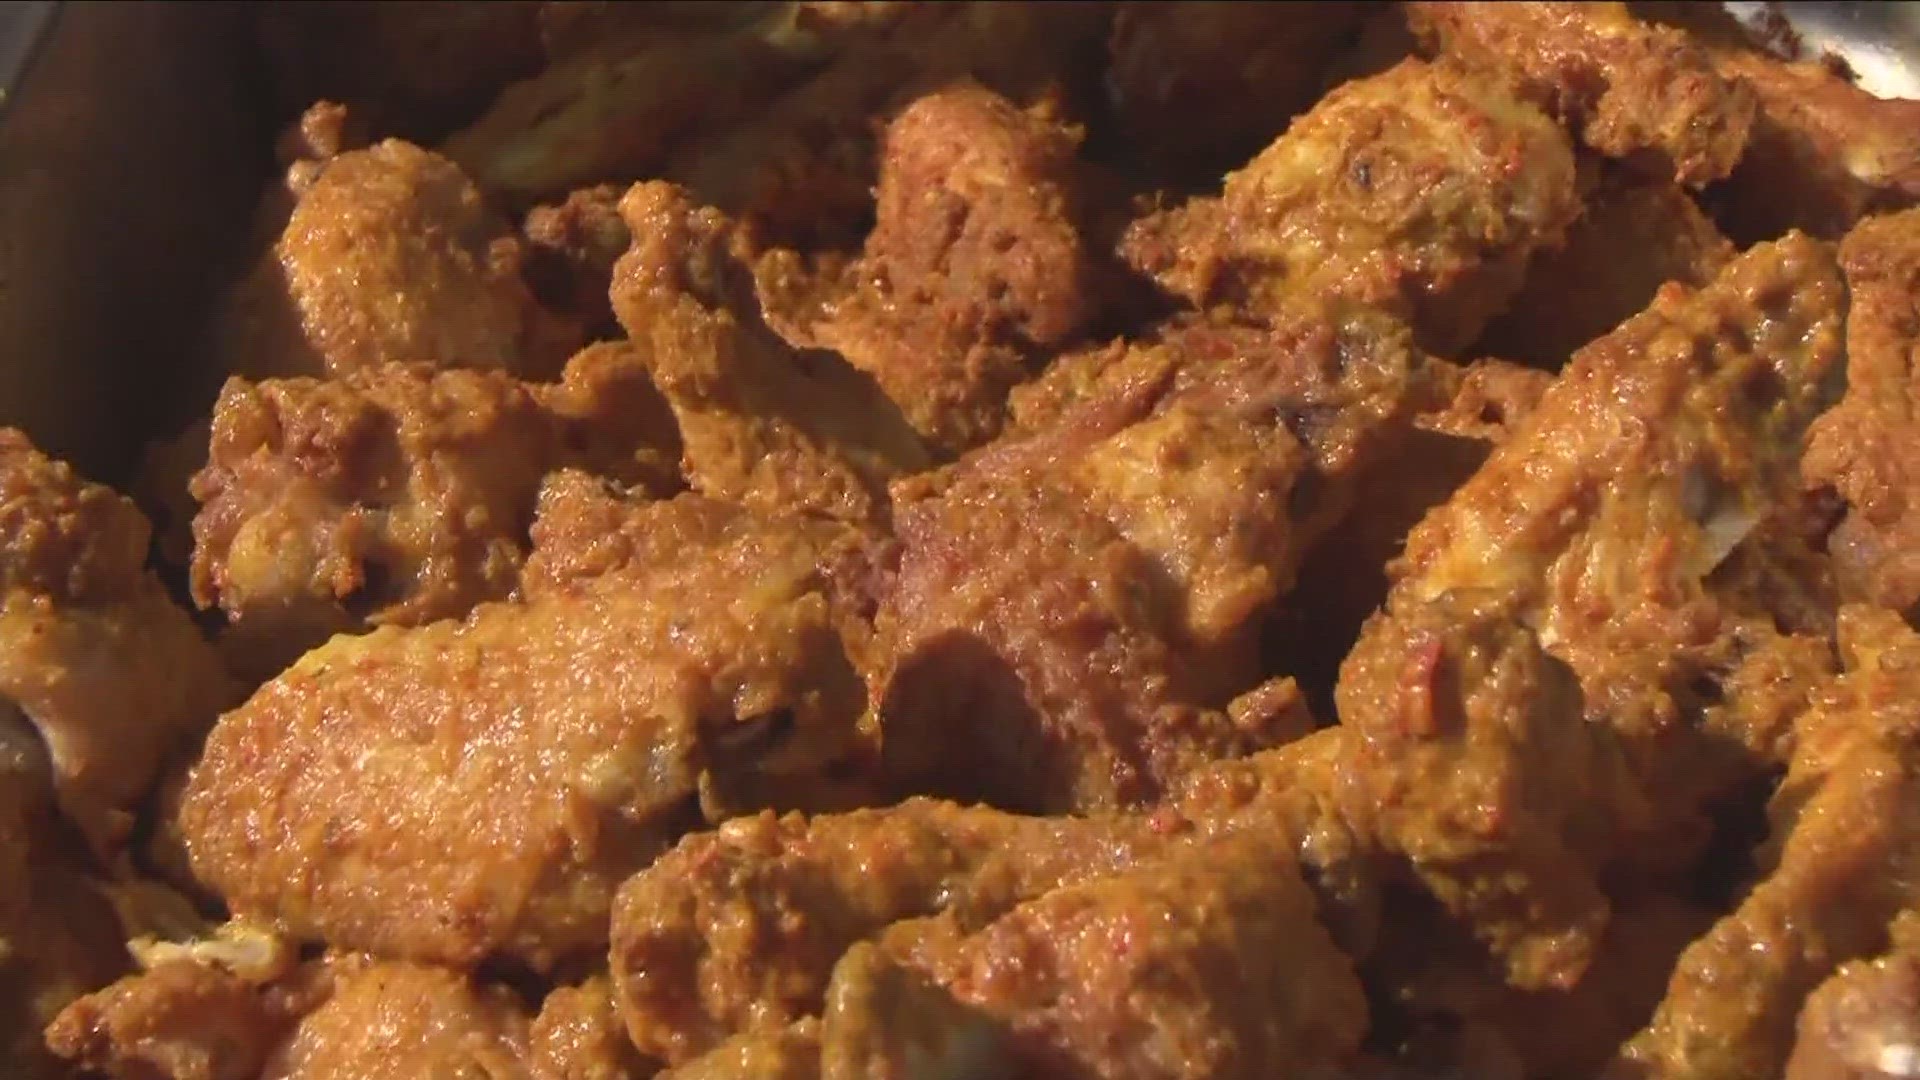 The National Buffalo Wing Festival wants your vote as it competes against 19 other events in a nationwide poll.